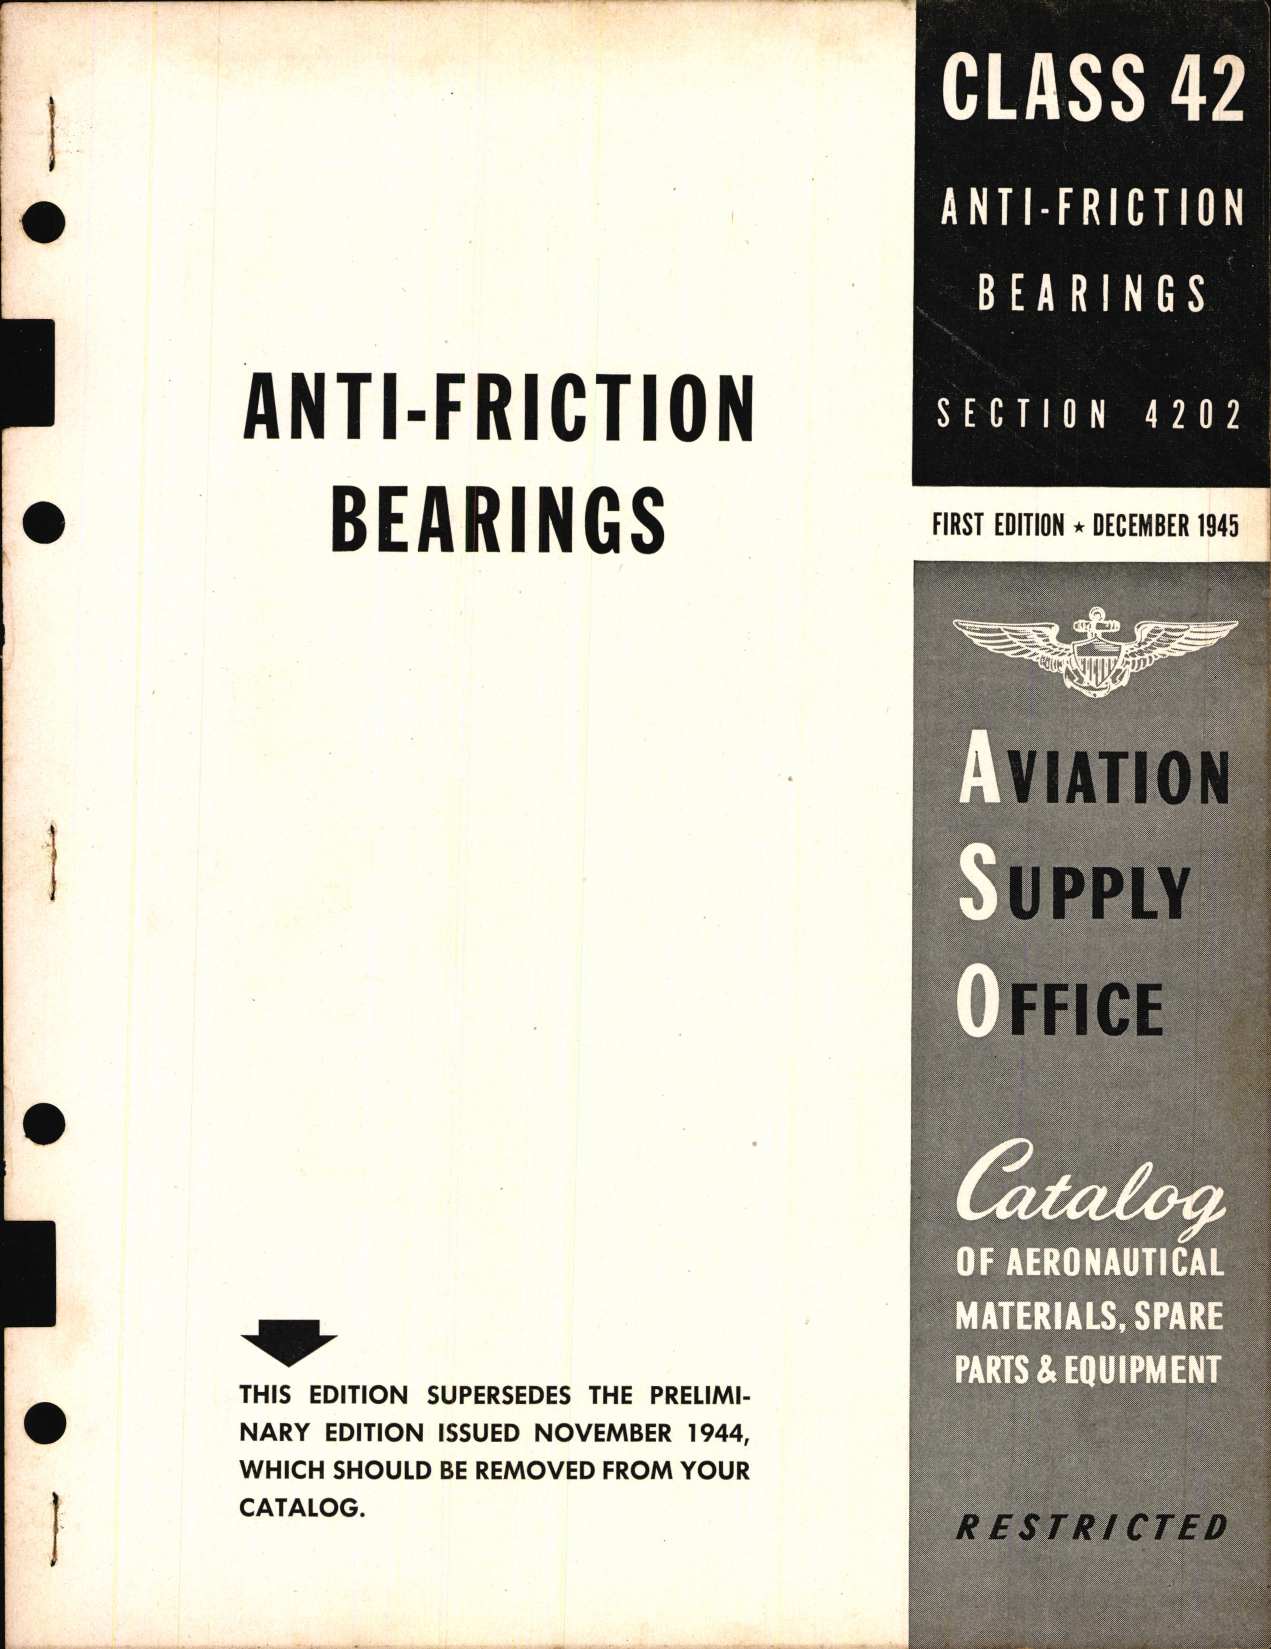 Sample page 1 from AirCorps Library document: Anti-Friction Bearings